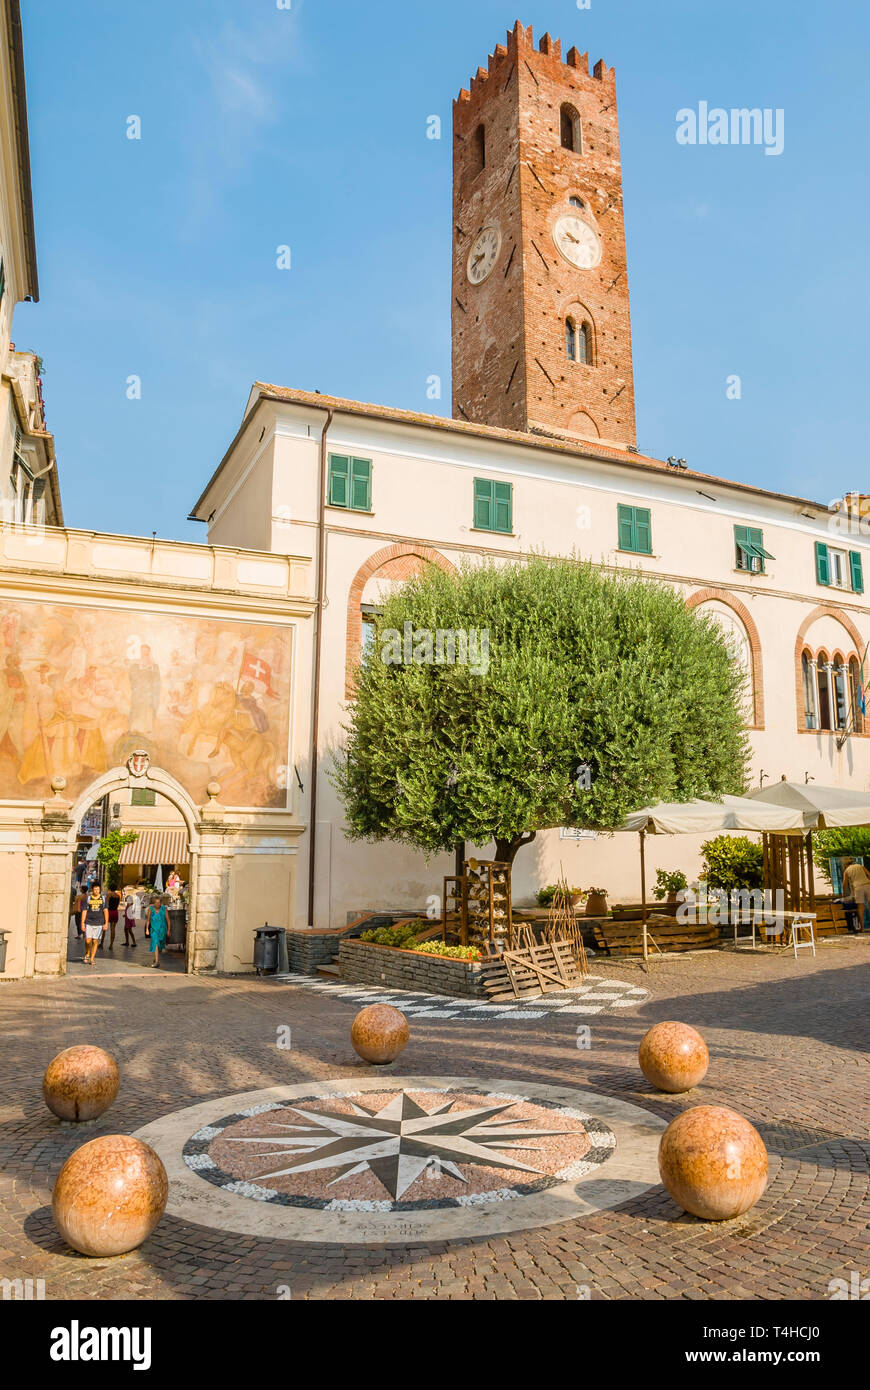 Civic Tower in the old town of Noli, Liguria North West Italy Stock Photo